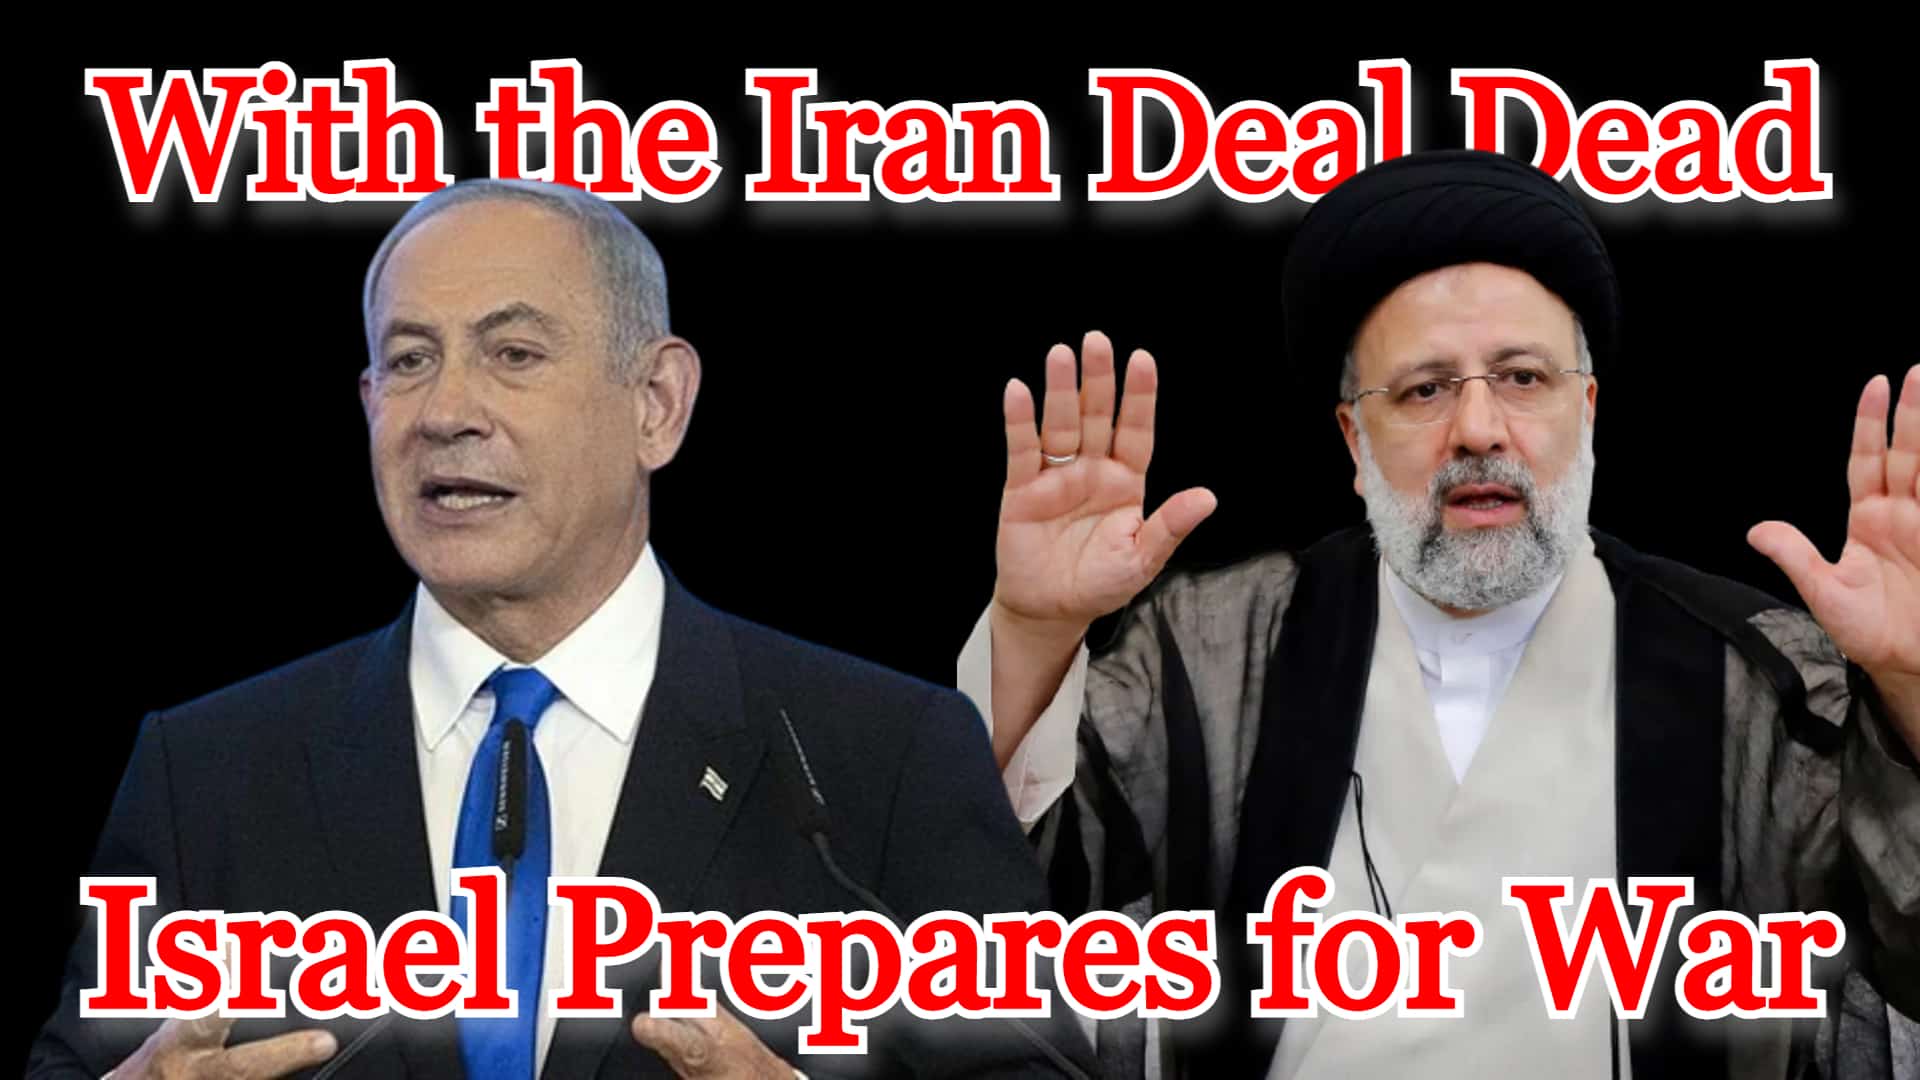 COI #367: With the Iran Deal Dead, Israel Prepares for War